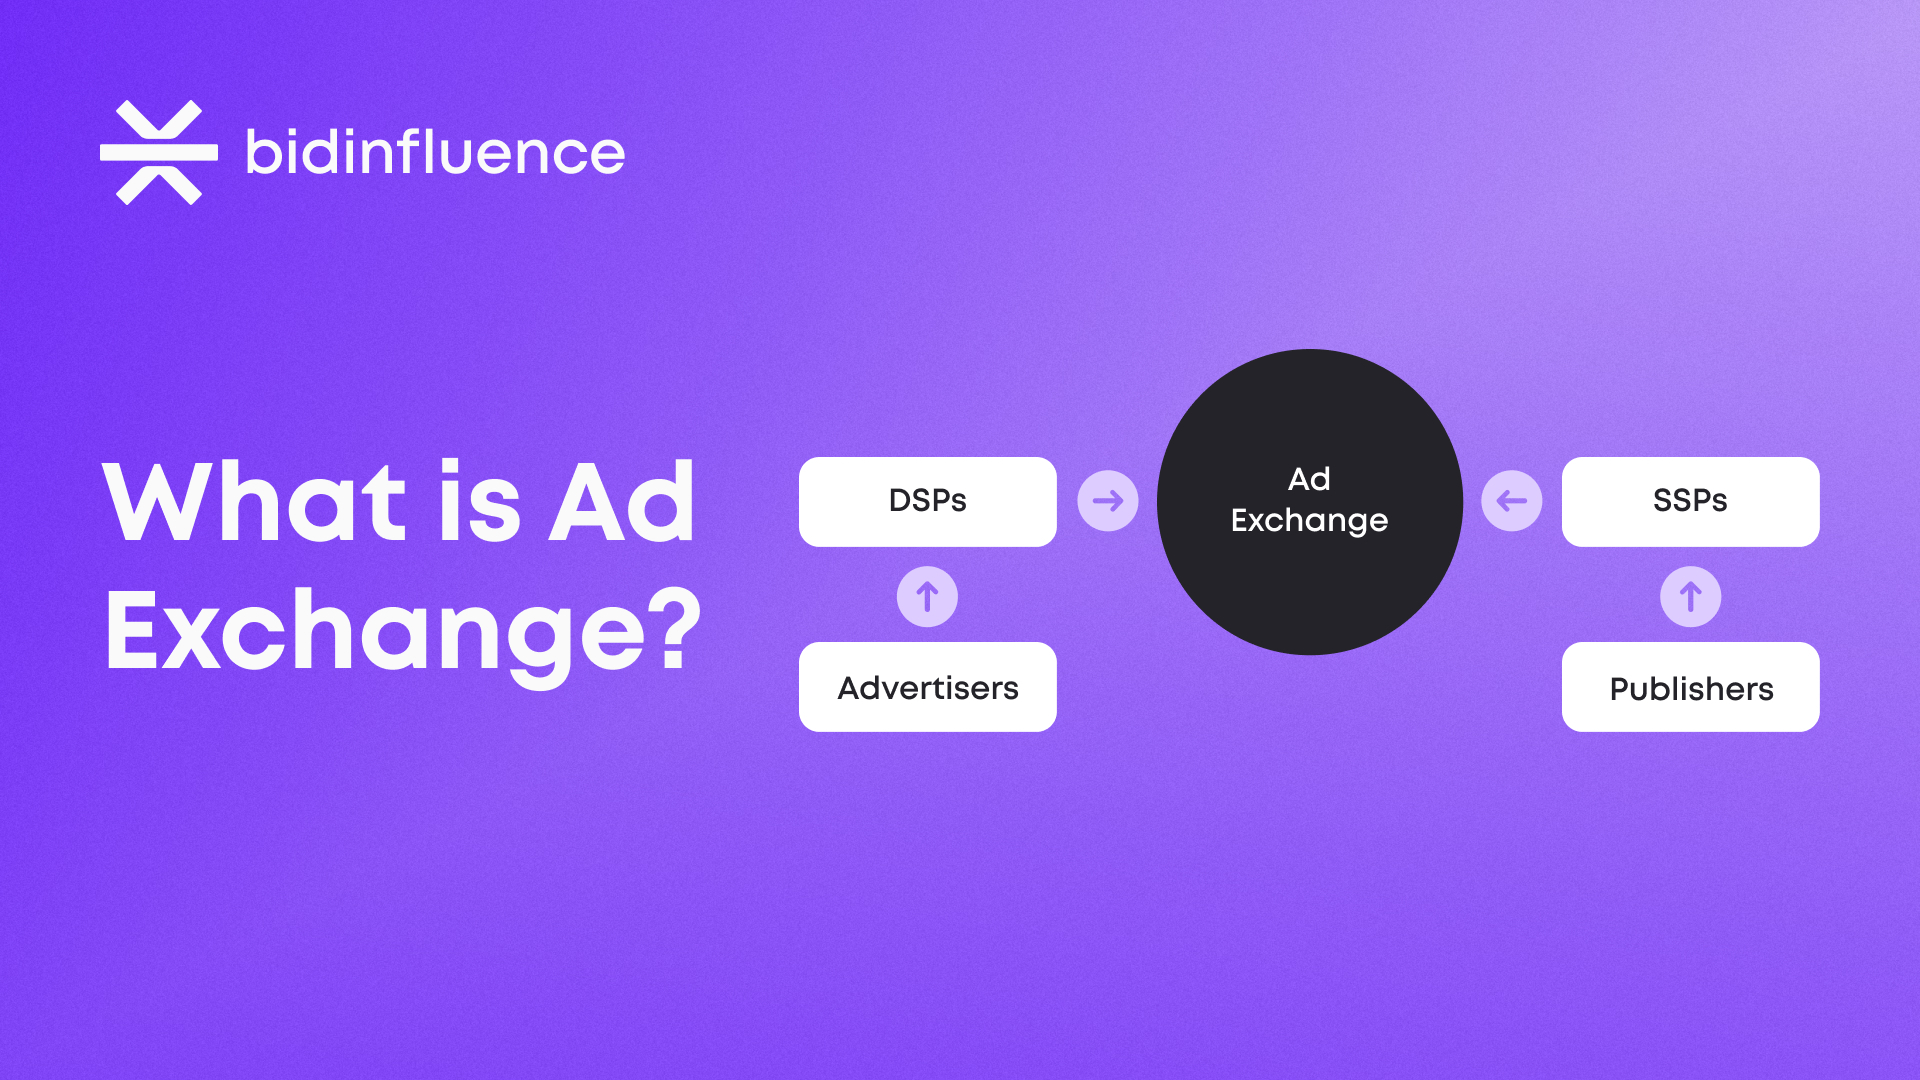 What is Ad Exchange?